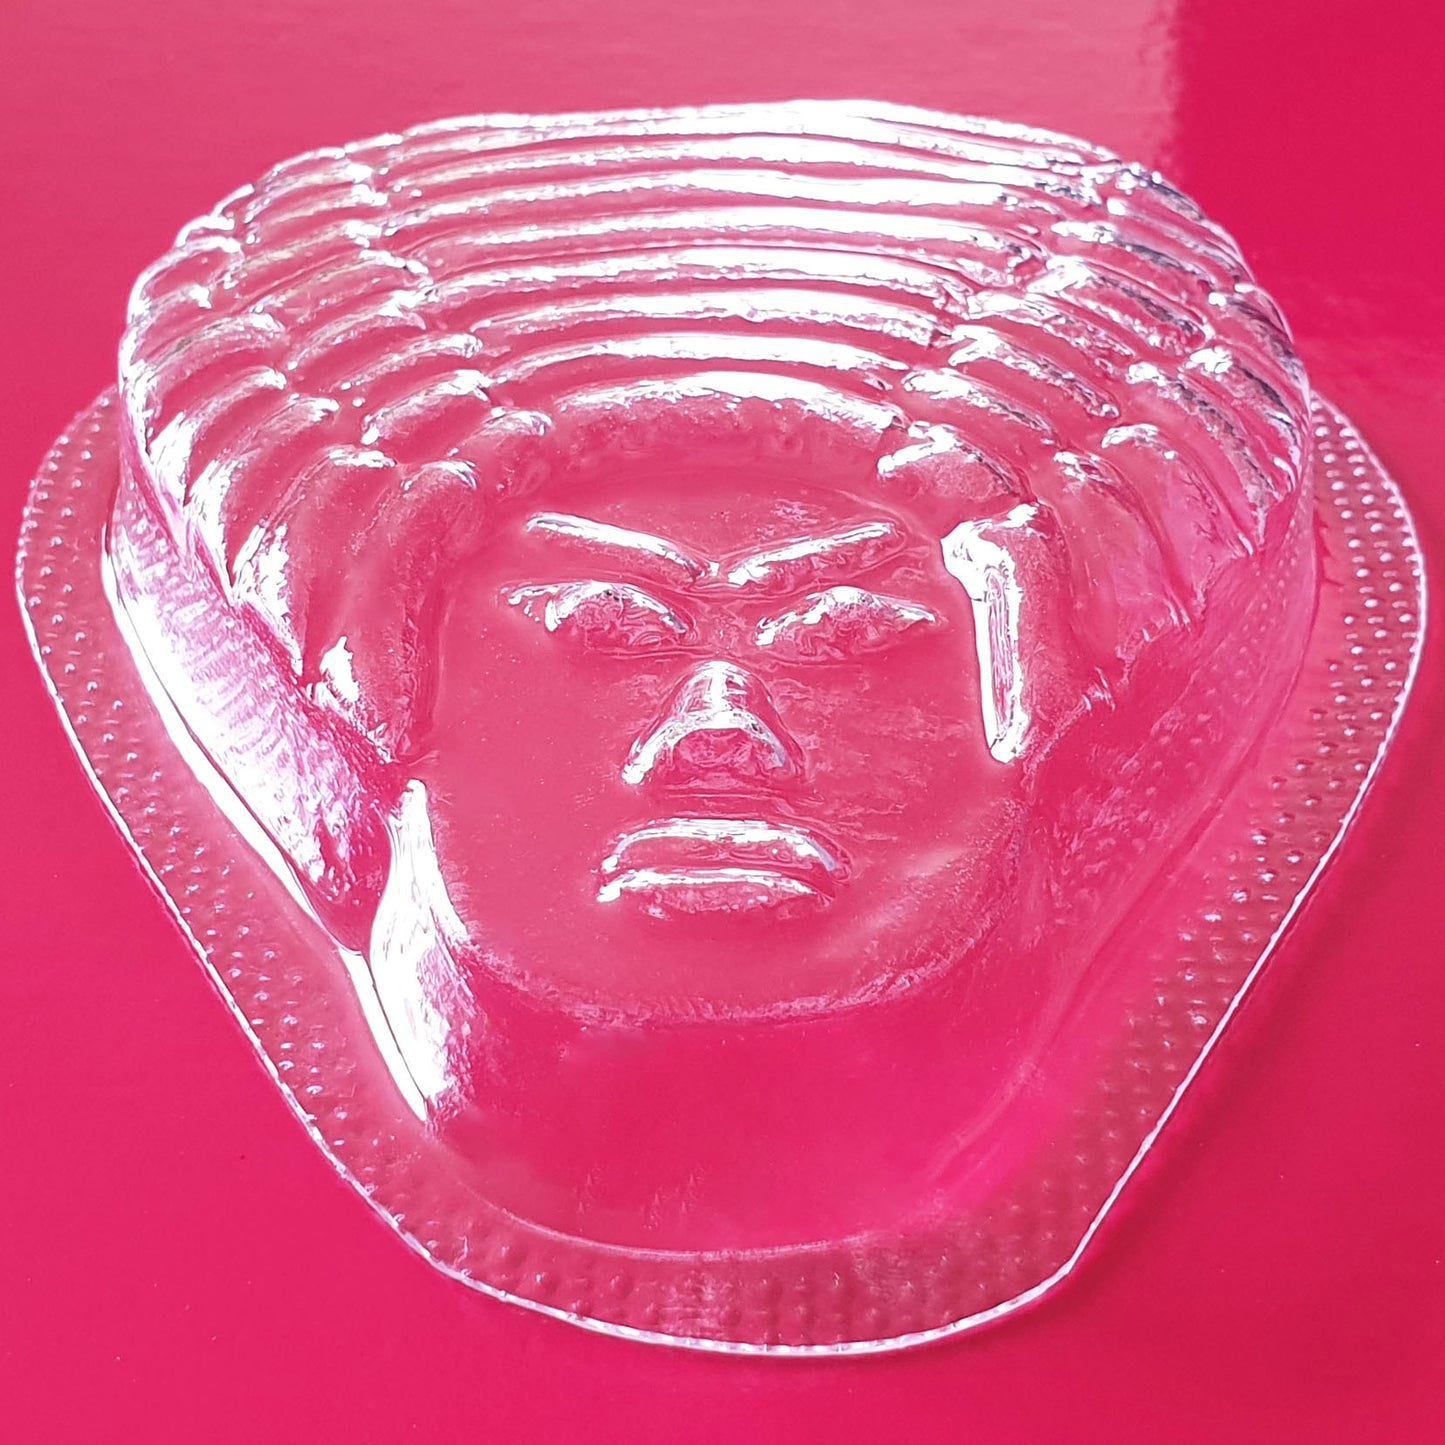 Bride of Frankenstein Mould | Truly Personal | Bath Bomb, Soap, Resin, Chocolate, Jelly, Wax Melts Mold